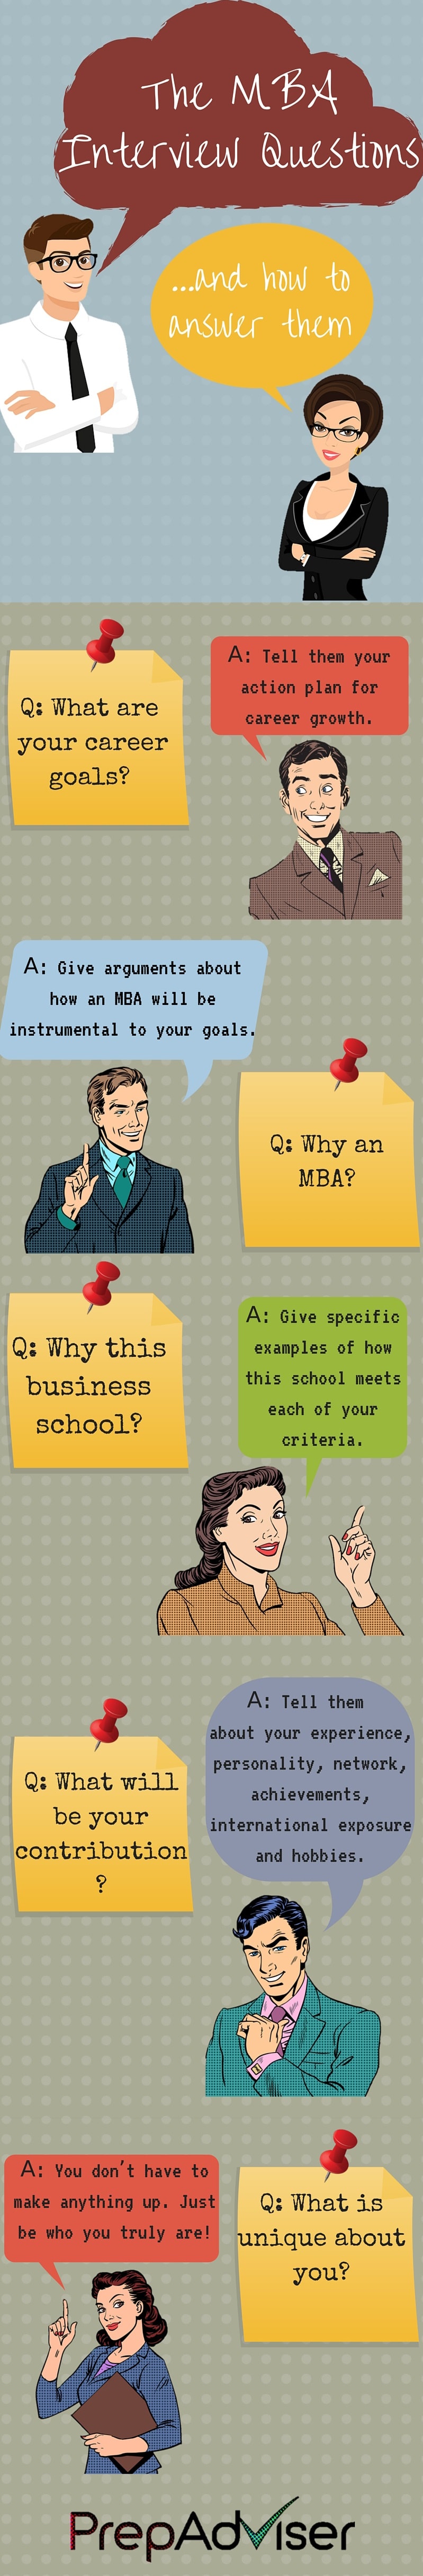 Master These MBA Interview Questions PrepAdviser Infographic